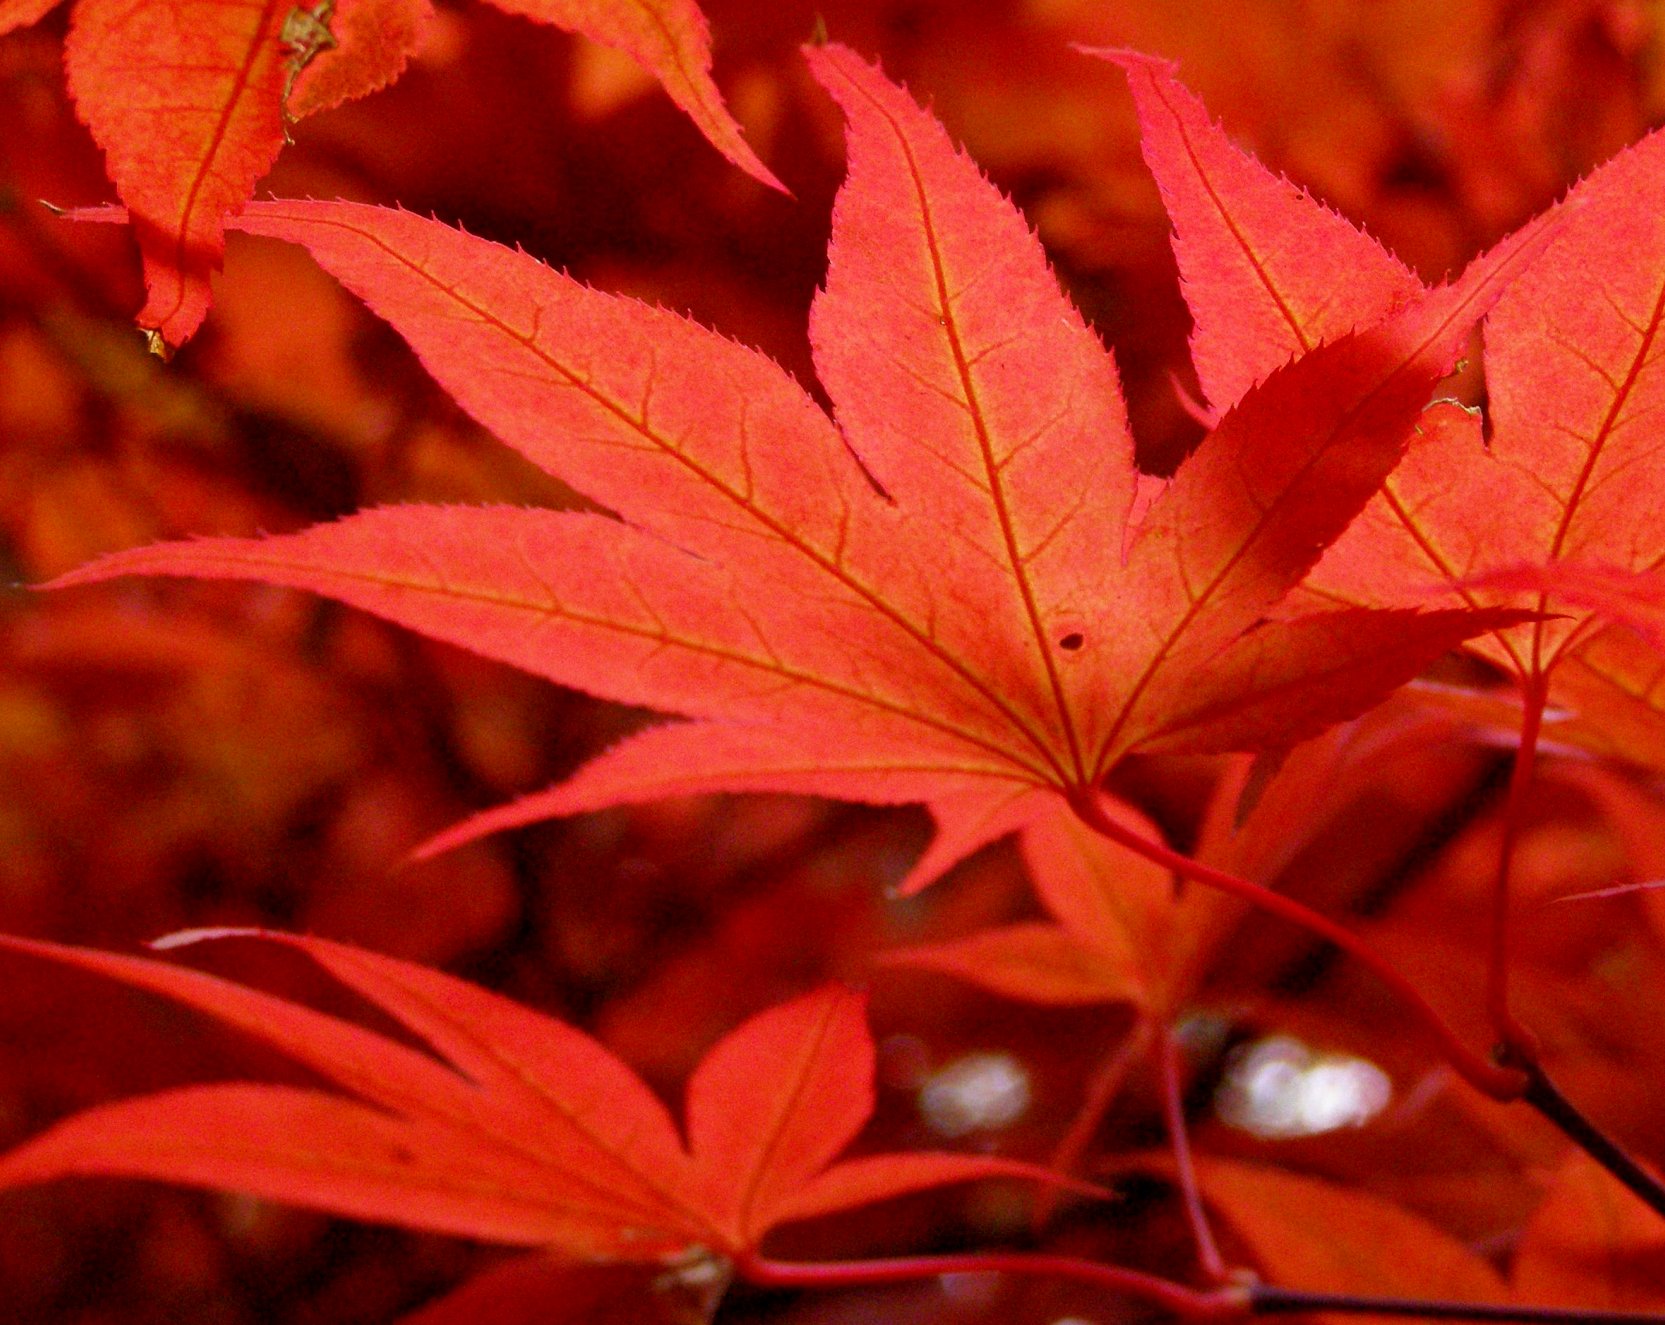 File:Maple leaves in October 2009.jpg - Wikipedia, the free encyclopedia